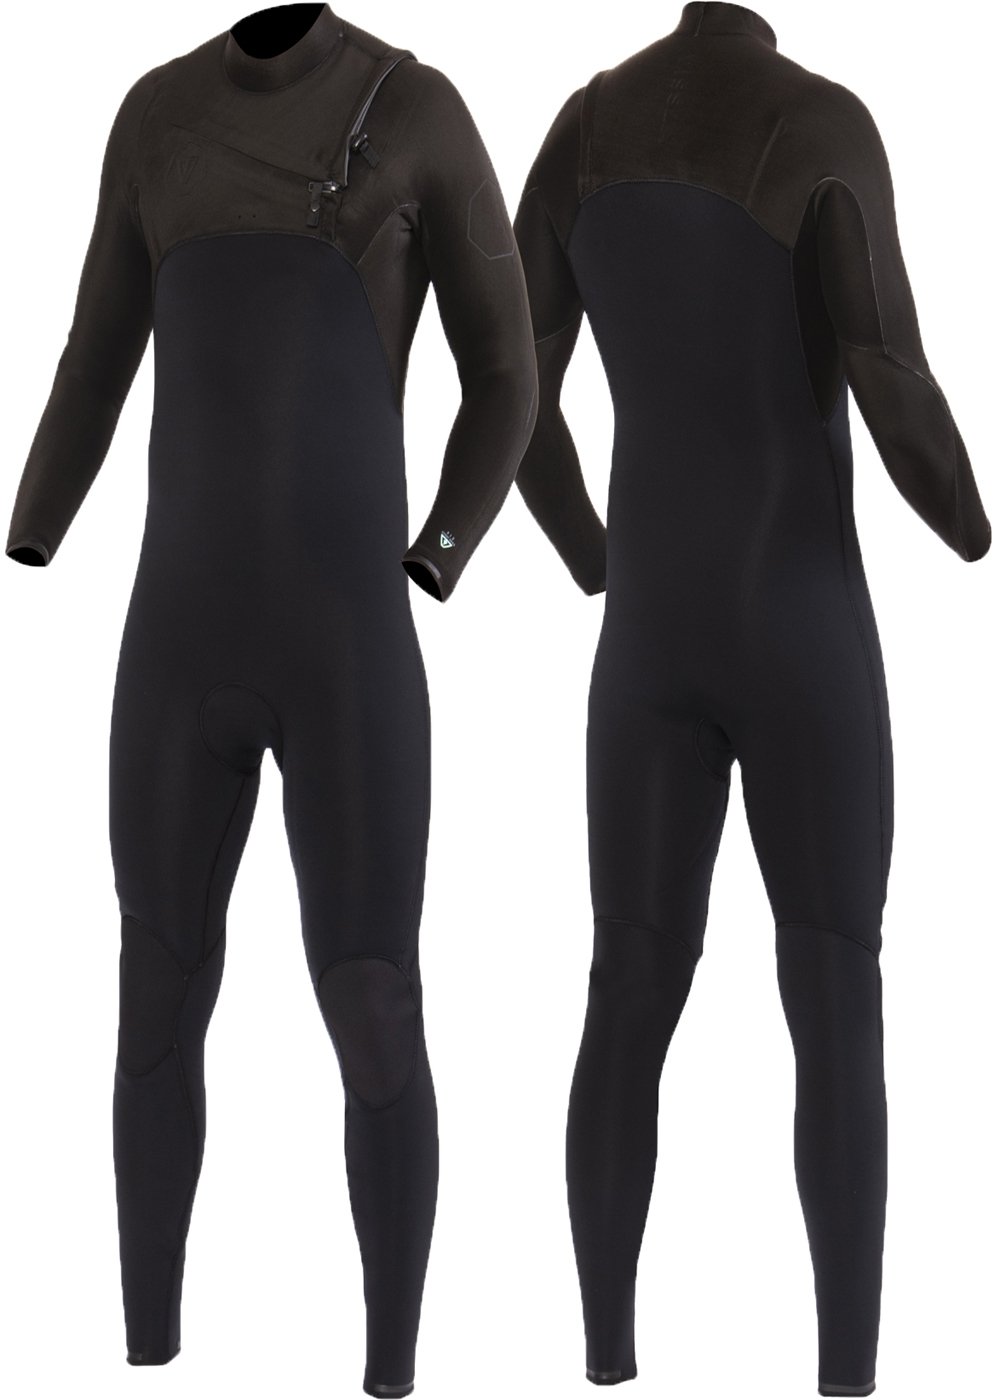 Vissla Men's Black High Seas ll 3-2 Chest Zip Full Wetsuit. Front and Back View.